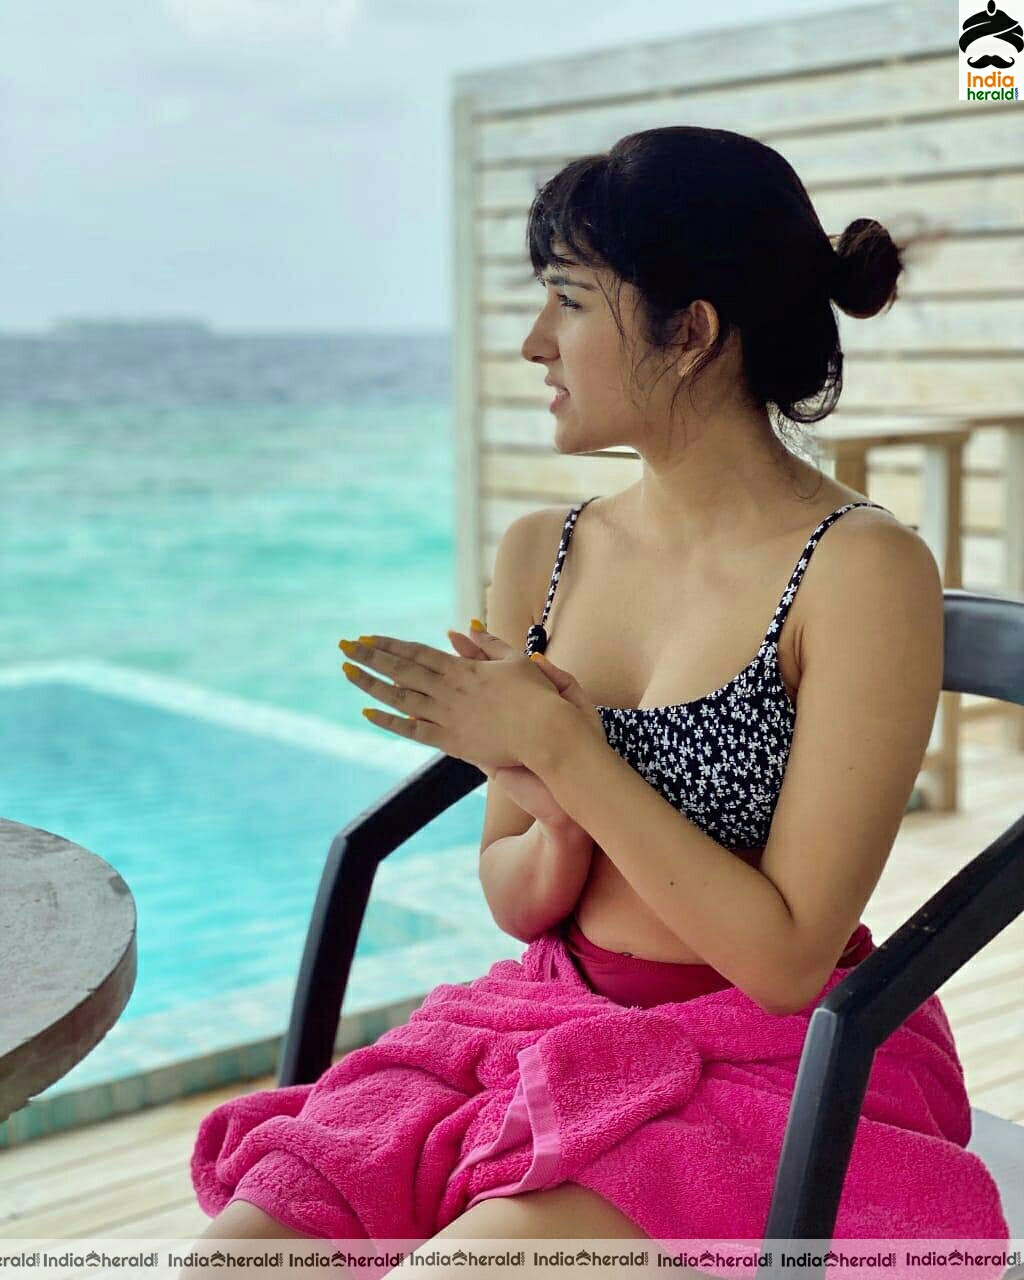 Sunny Leone stuns in her latest post as she says hello from Maldives